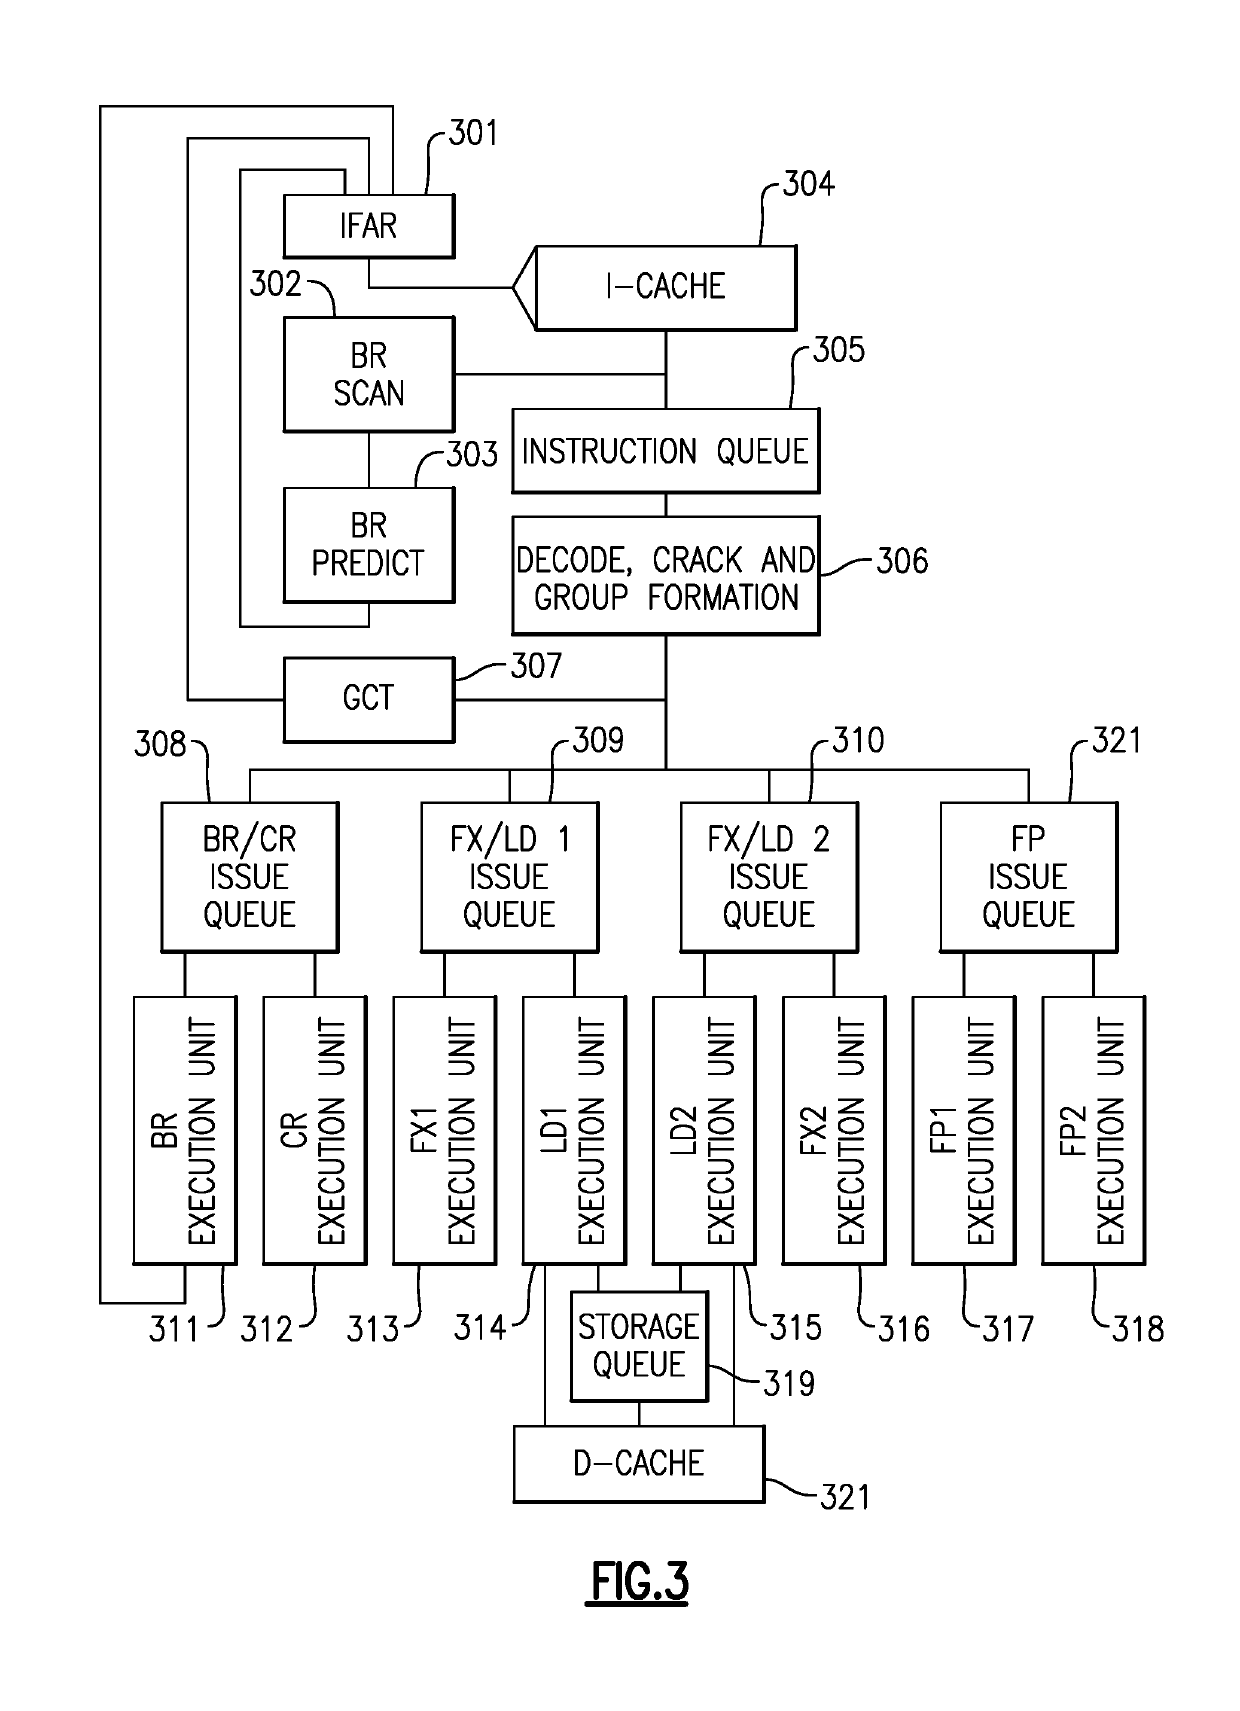 Suppressing branch prediction on a repeated execution of an aborted transaction